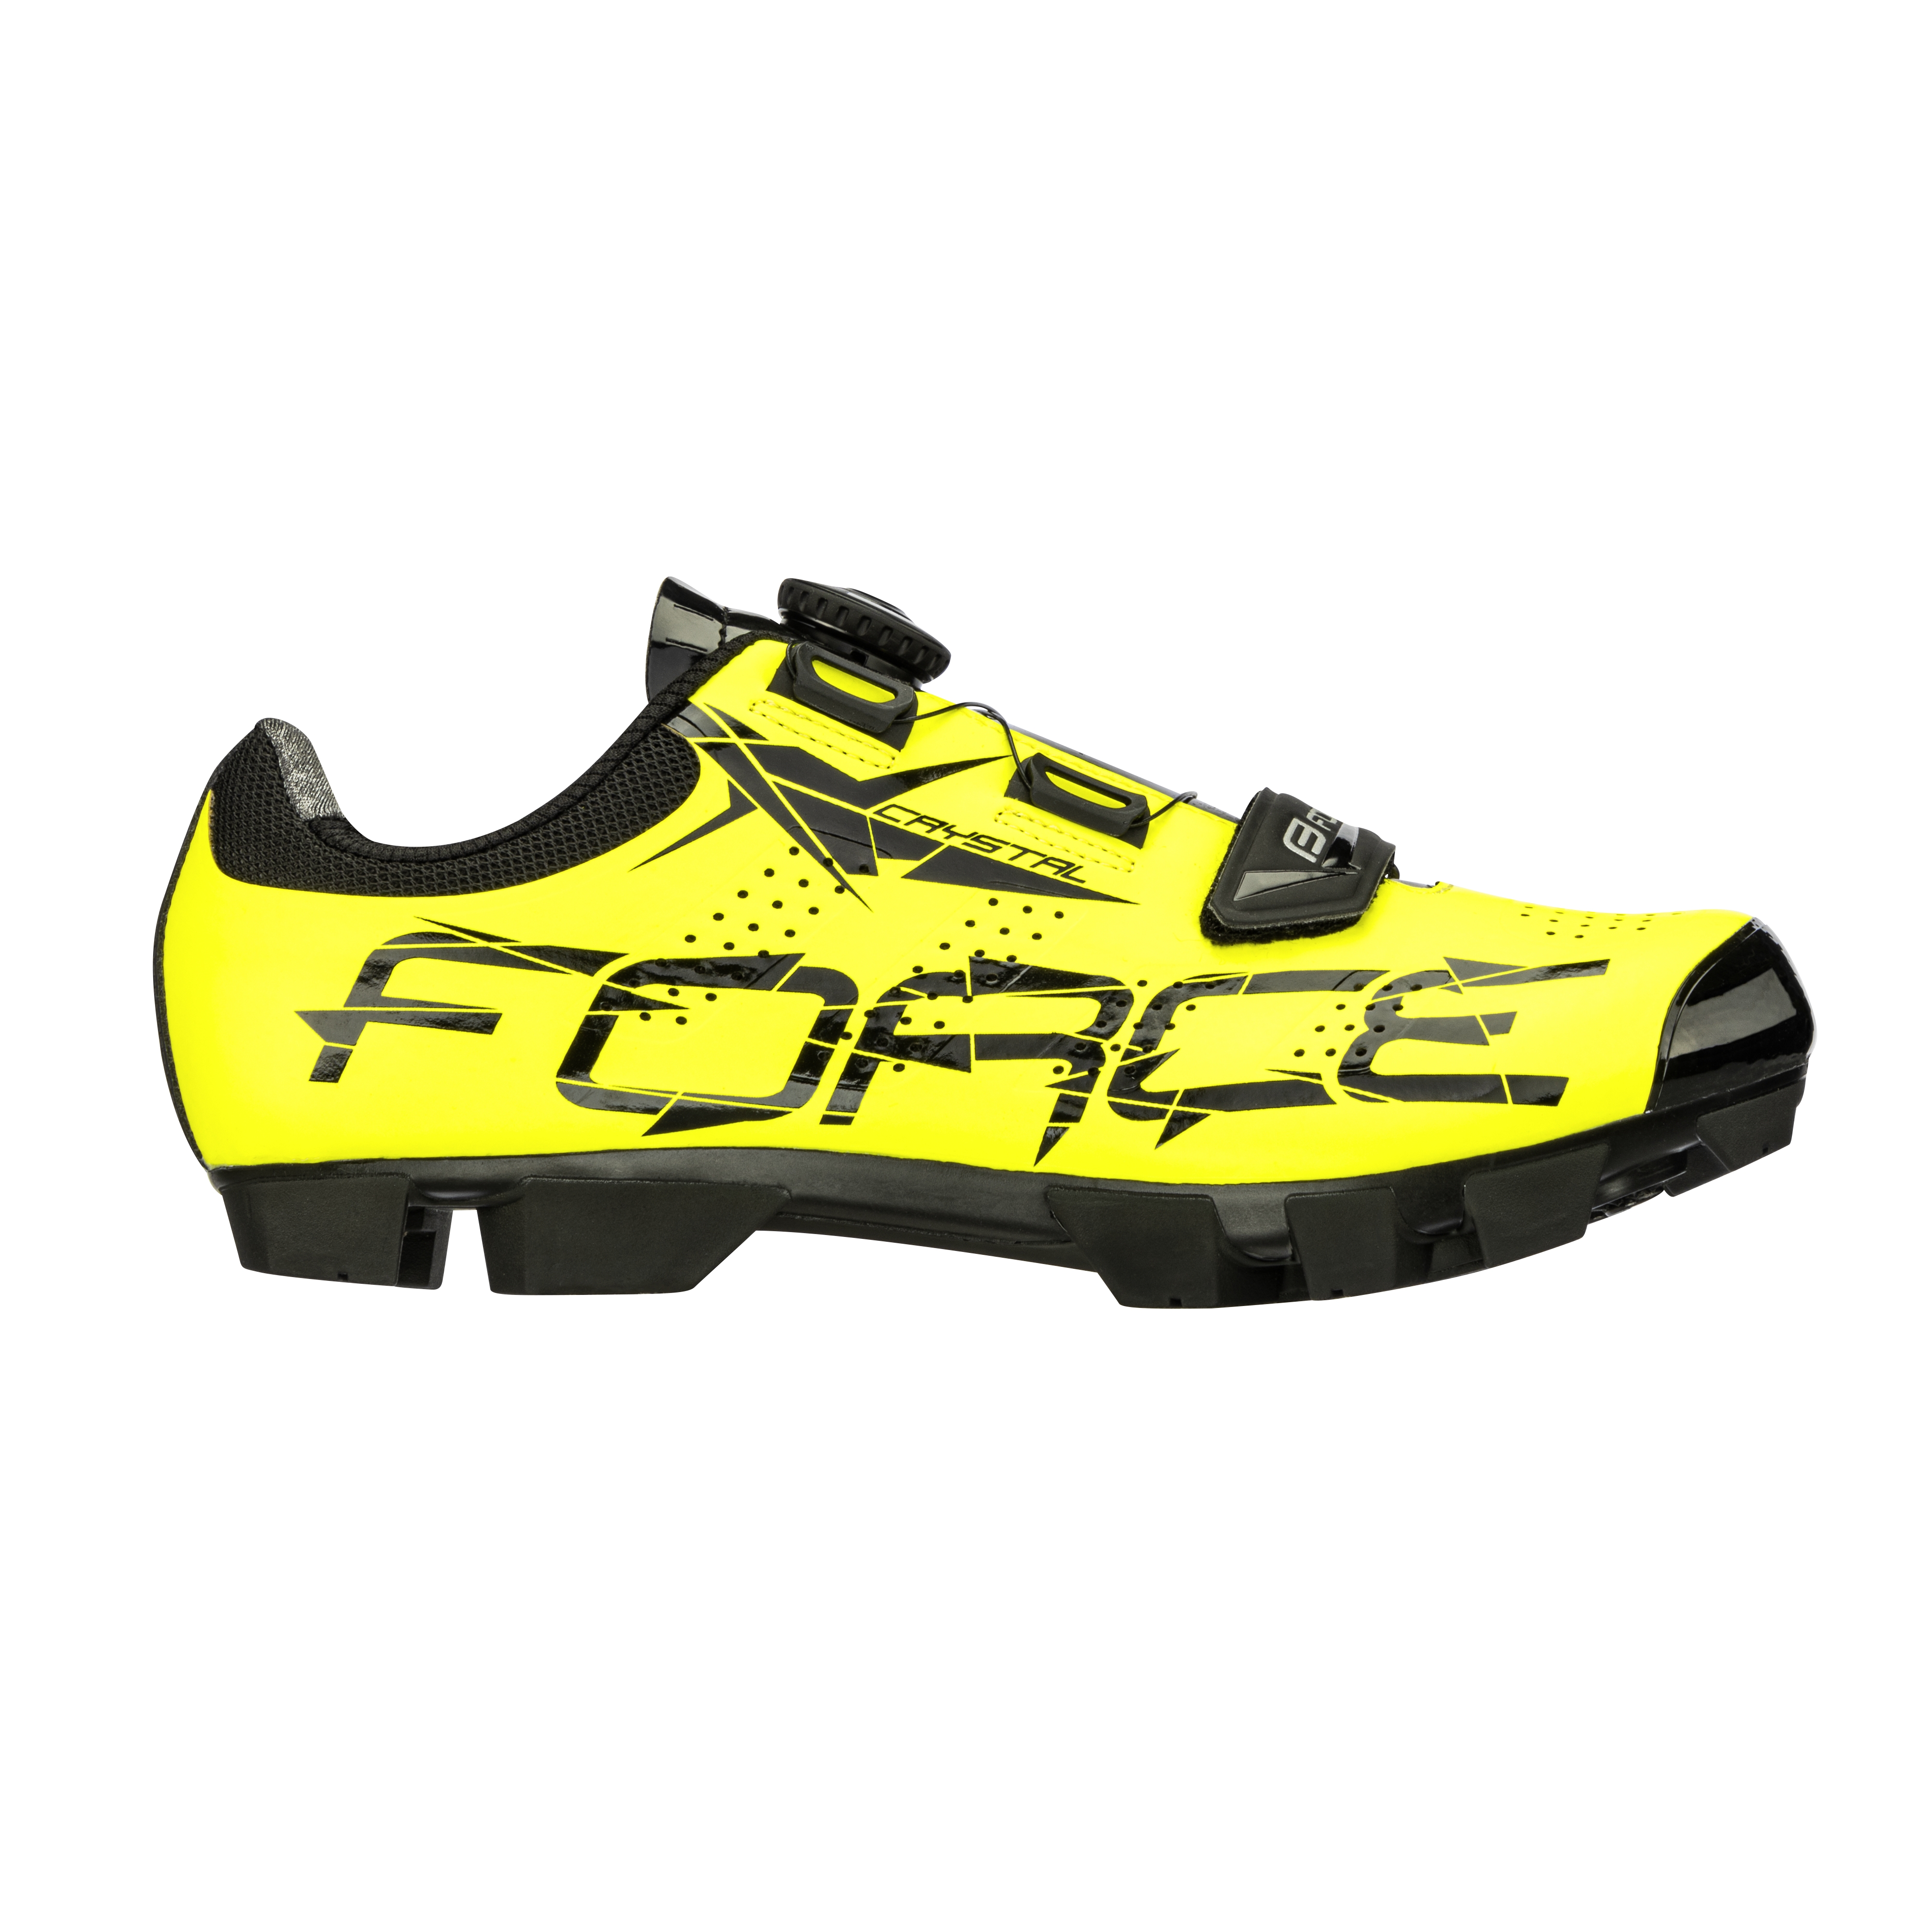 tretry FORCE MTB CRYSTAL, fluo Barva: Fluo, Velikost: 36